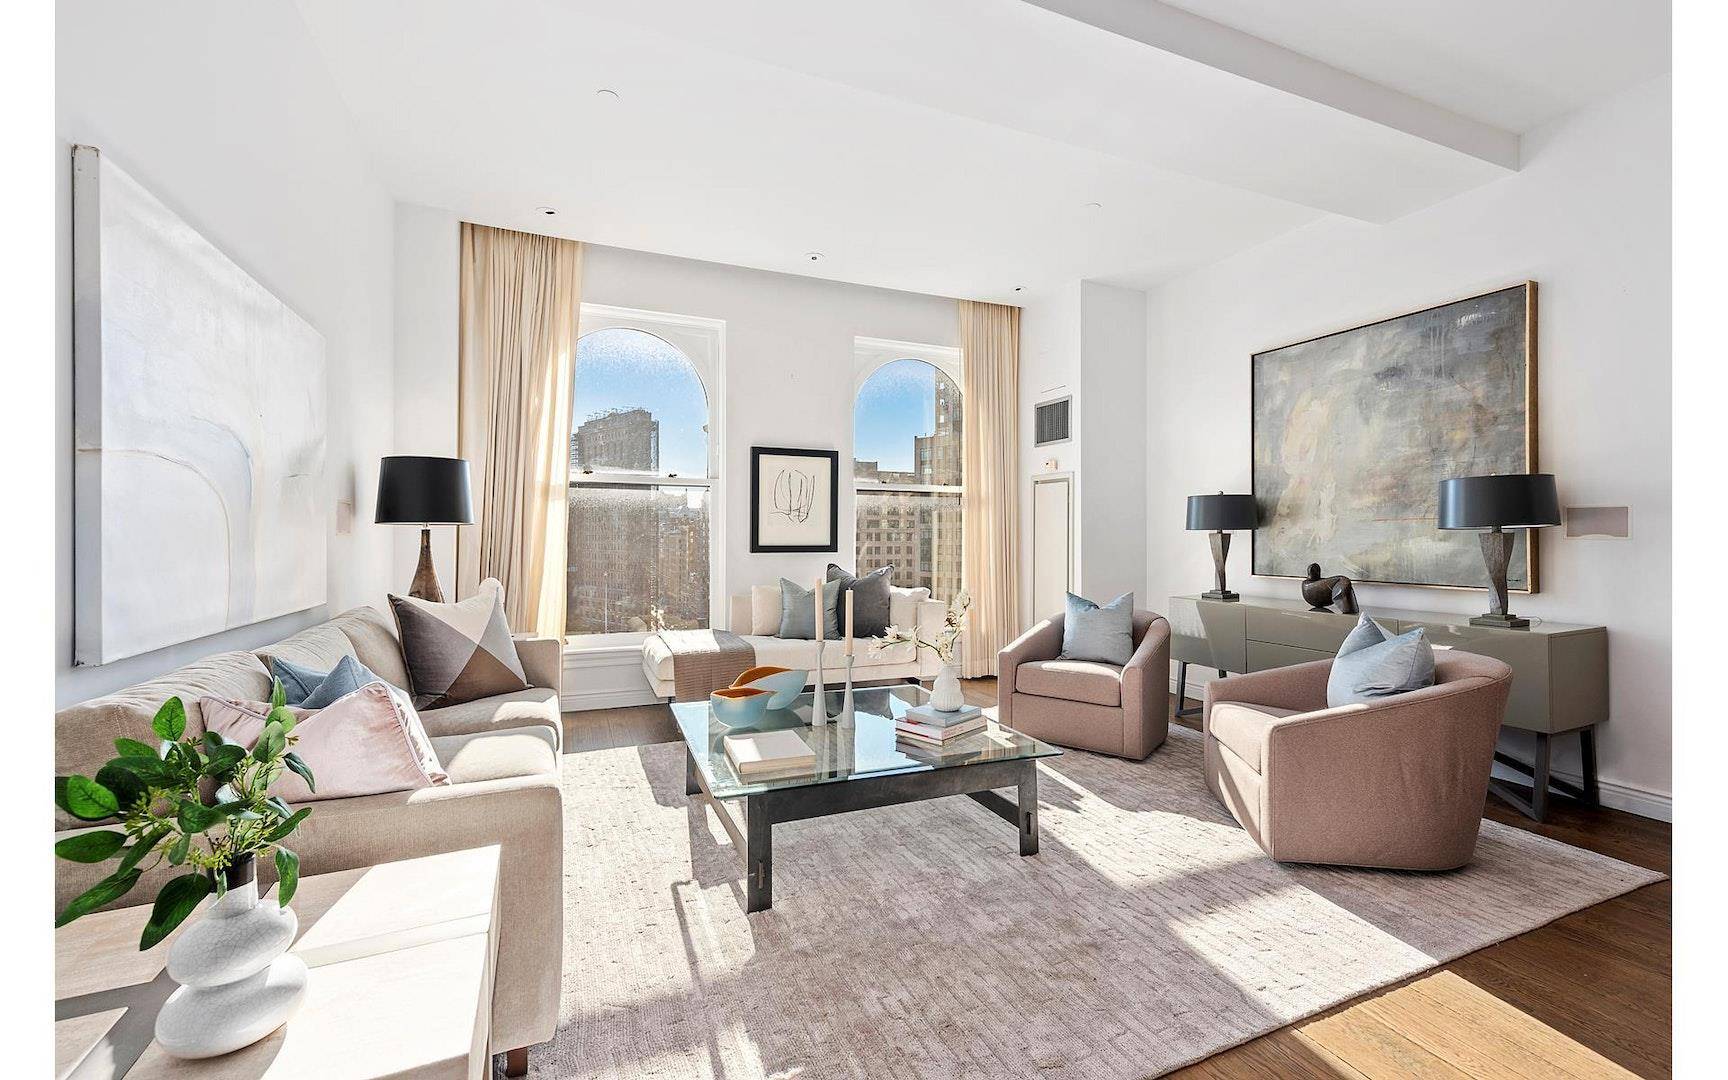 Price adjusted to move, this duplex 3 bed 3 bath with private outdoor space is newly vacant and may be delivered fully furnished or unfurnished at 225 Fifth Avenue, Penthouse ...